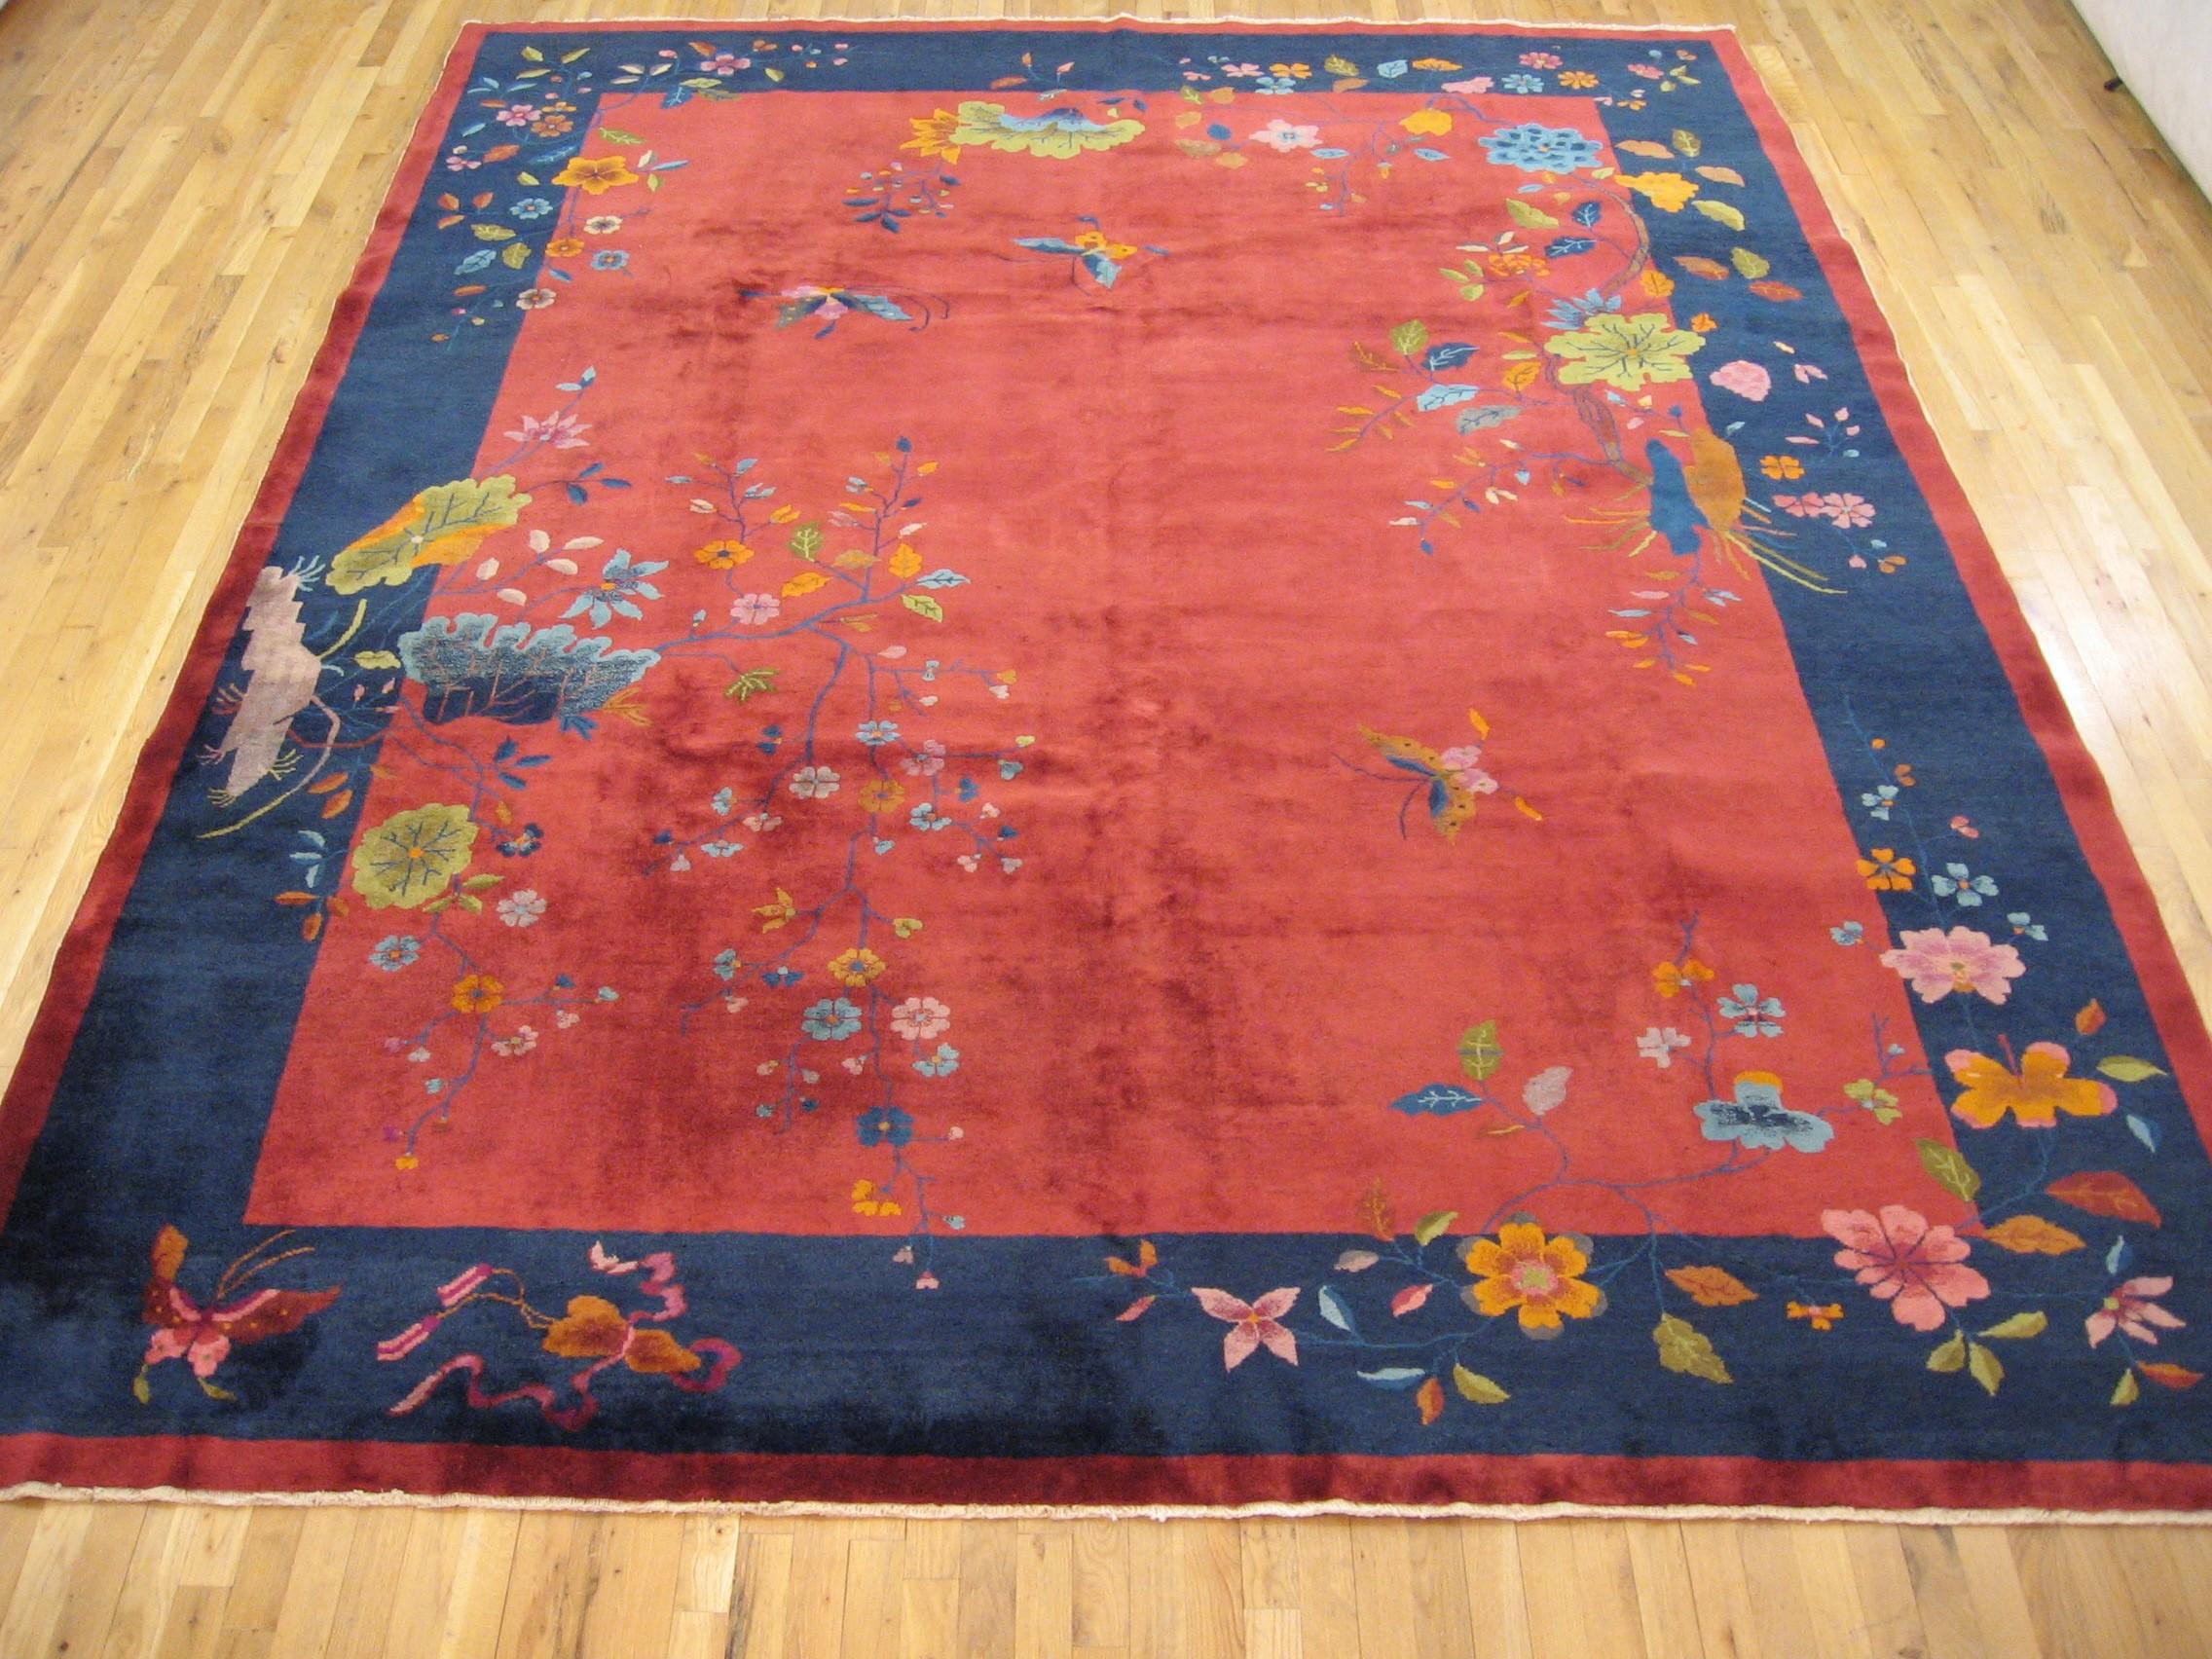 Antique Chinese Art deco rug, Room size, circa 1920

A one-of-a-kind antique Chinese Art deco oriental carpet, hand-knotted with medium thickness wool pile. This beautiful hand-knotted rug features art deco and chinese motifs on a large red open